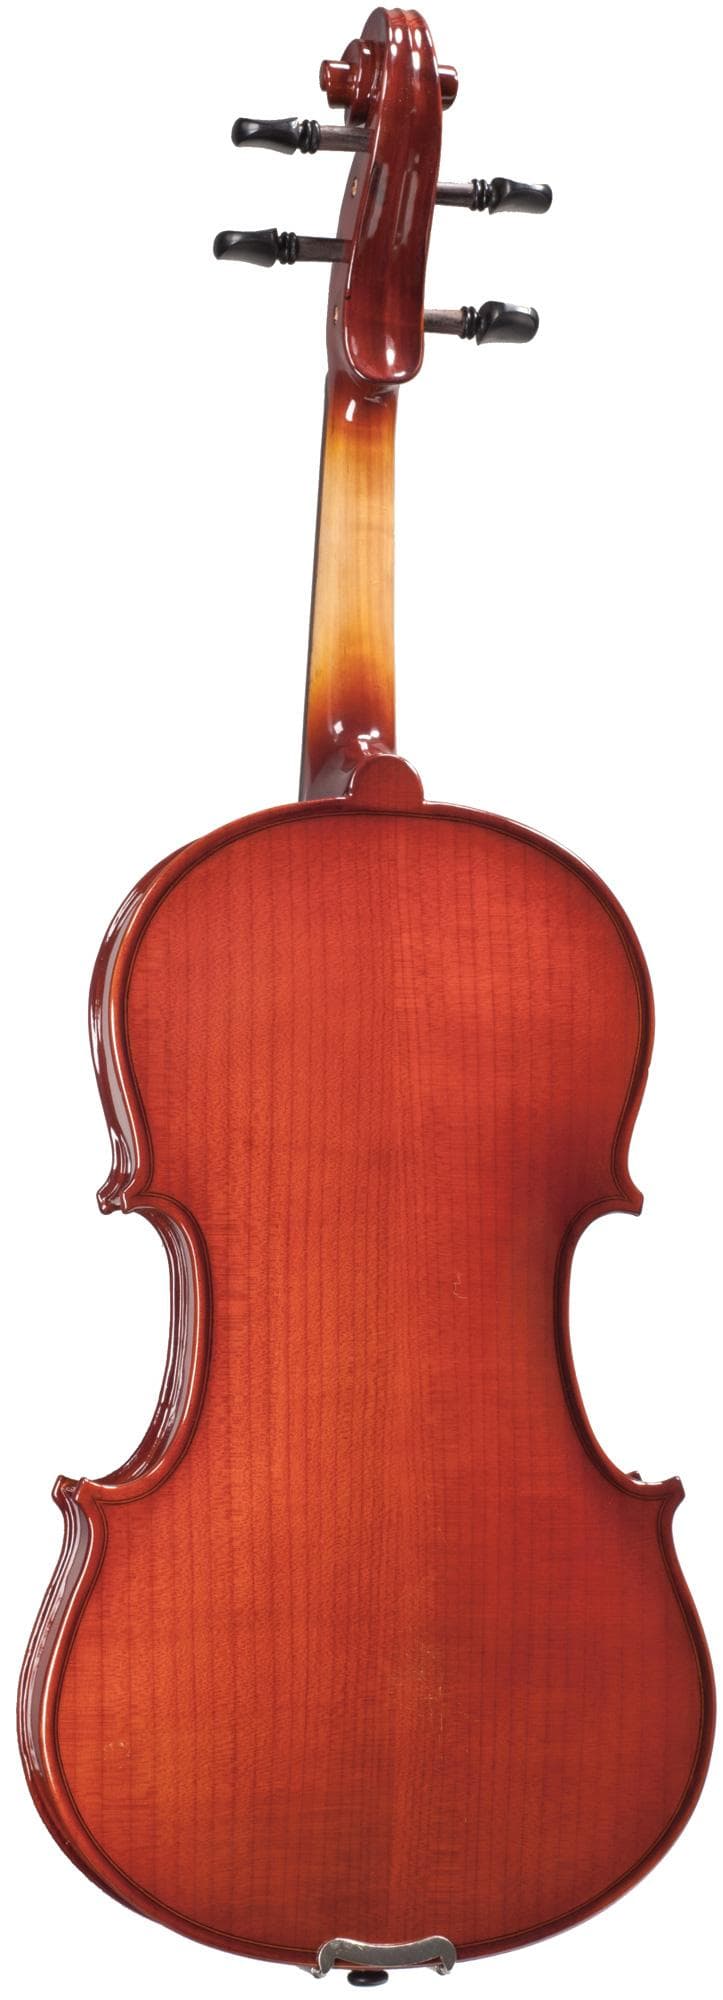 SharWay Standard Viola Outfit